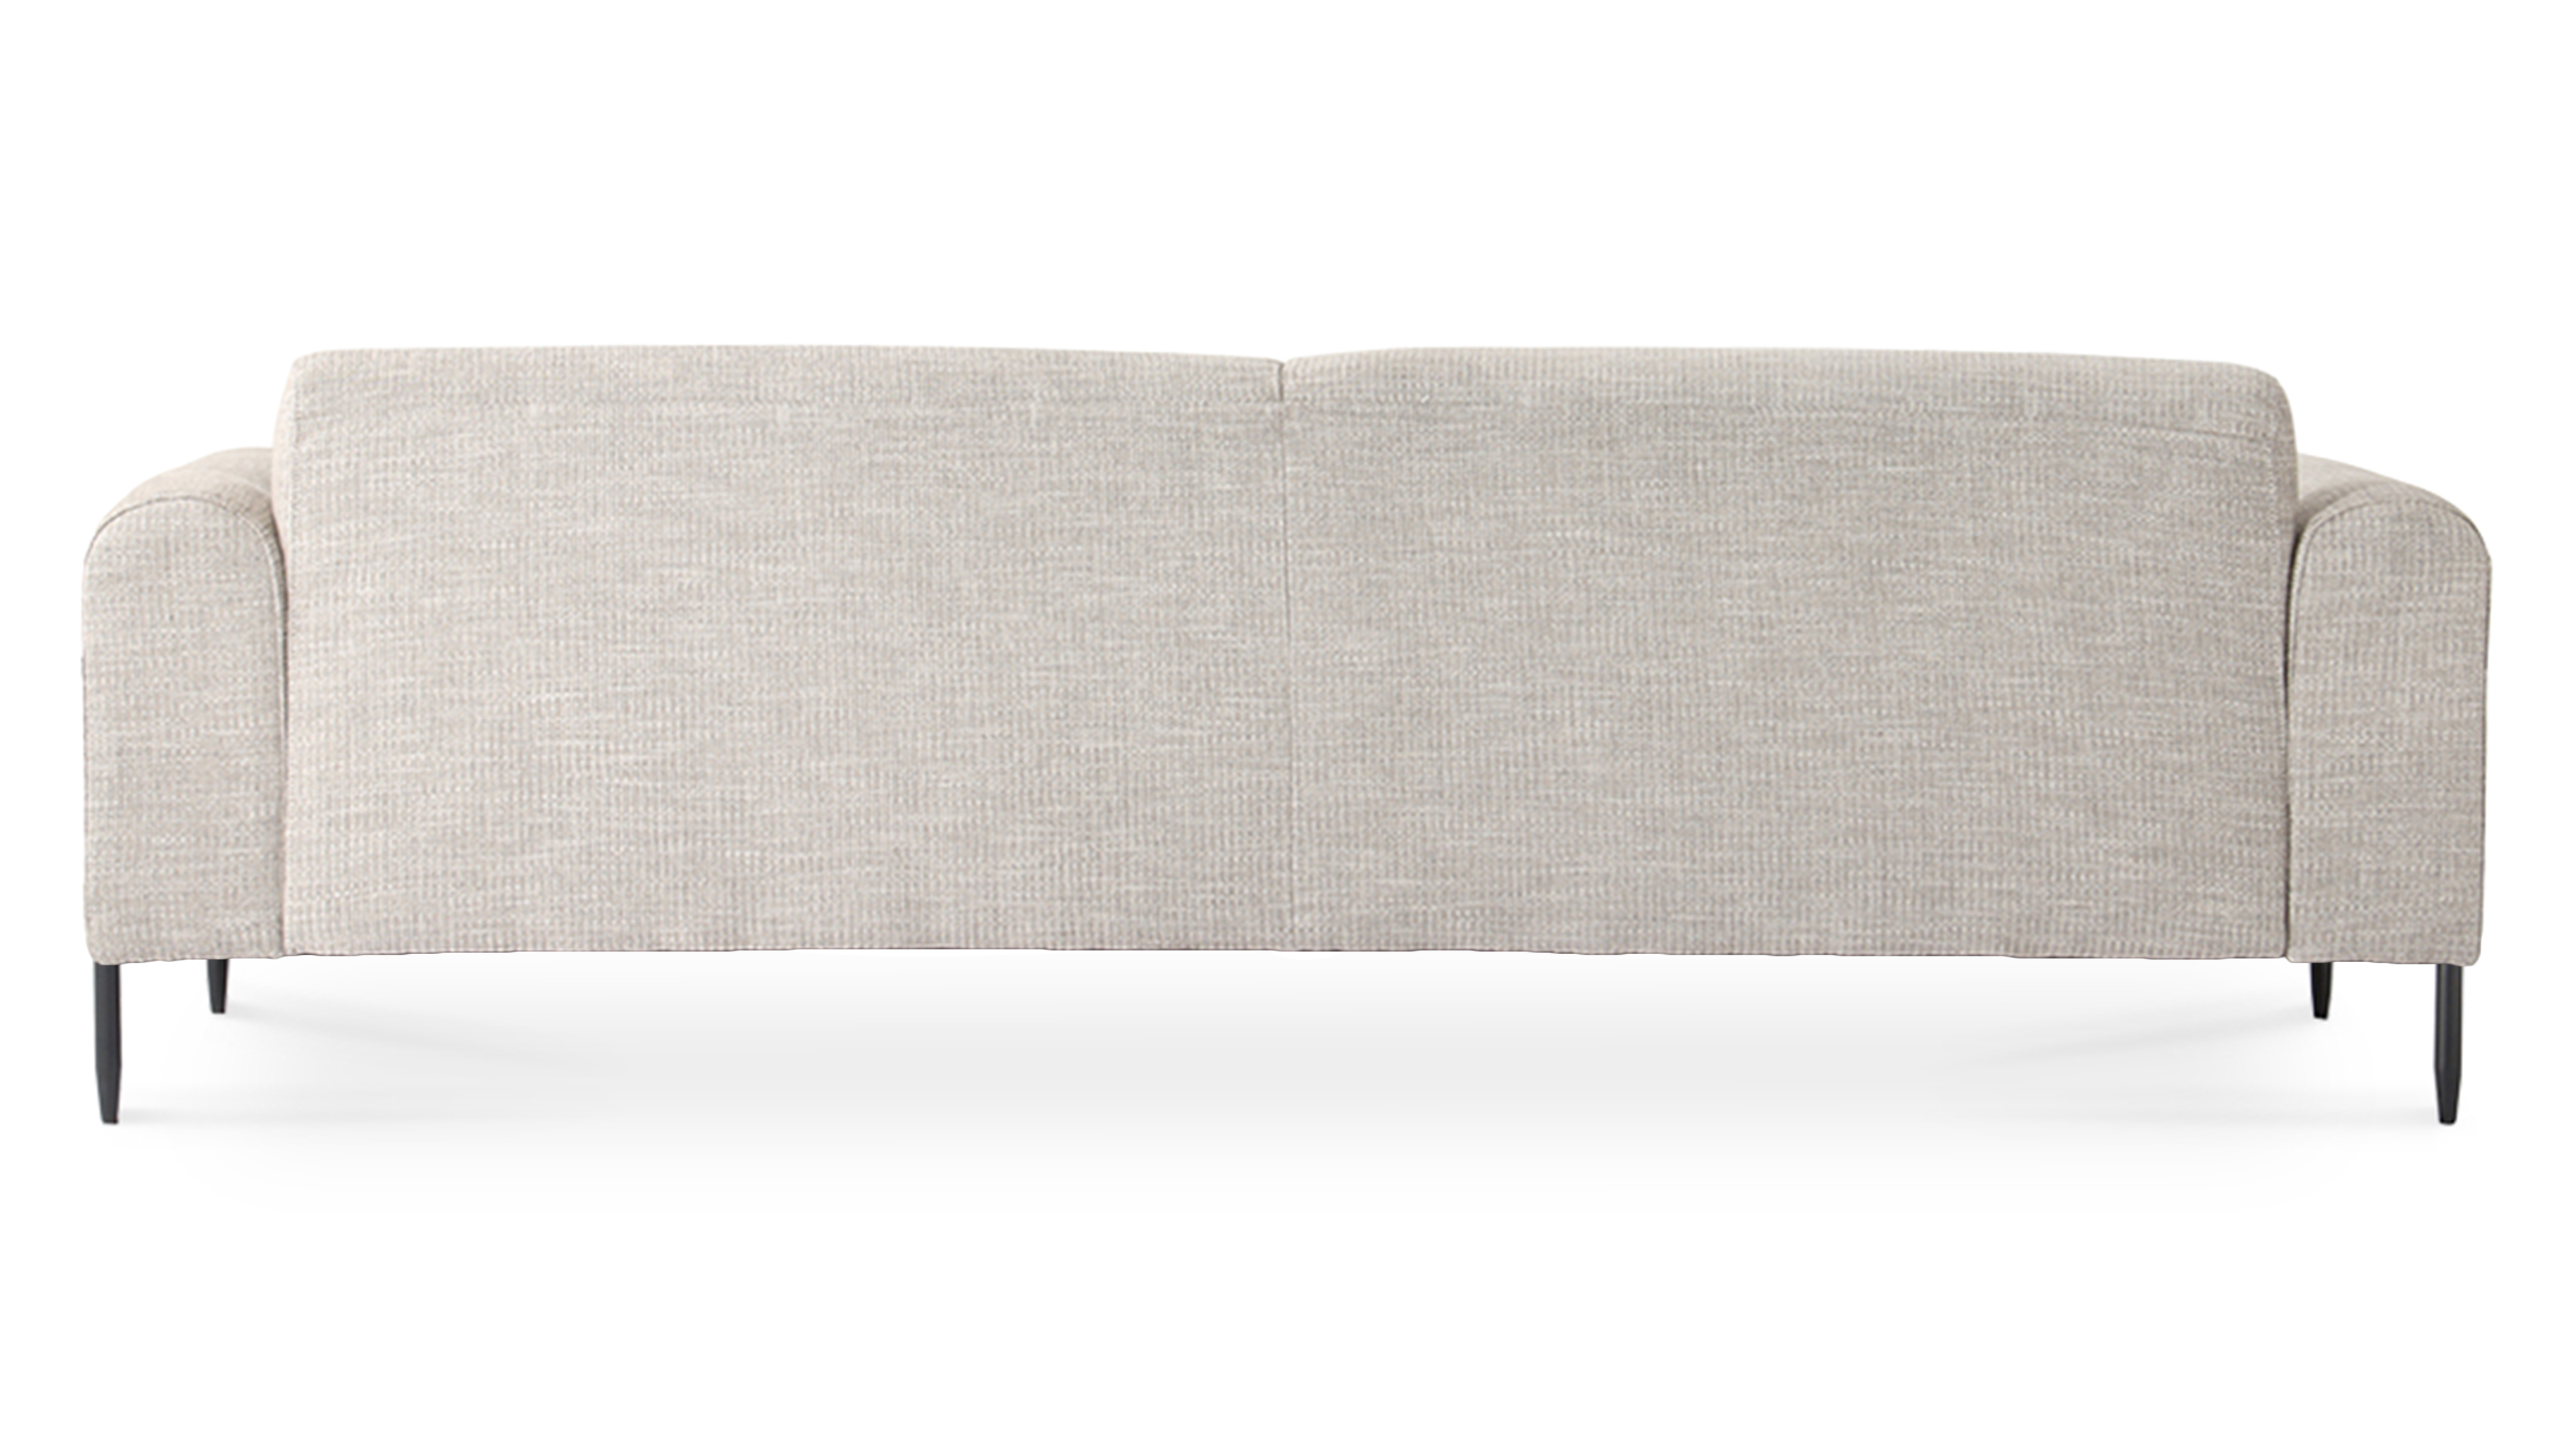 WS - District 2 seater sofa - Light Grey (Back)